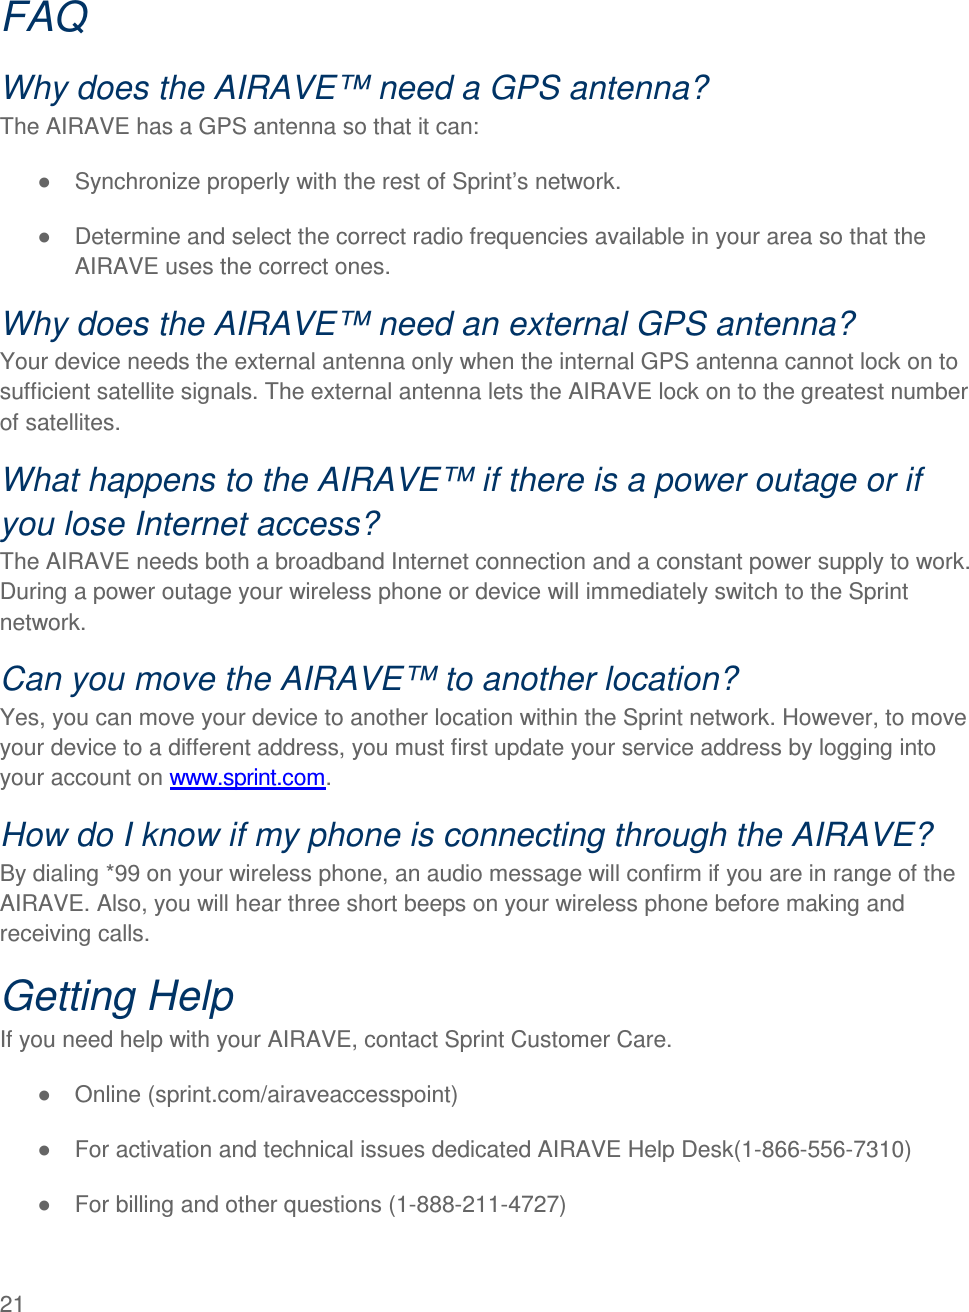  21    FAQ Why does the AIRAVE™ need a GPS antenna? The AIRAVE has a GPS antenna so that it can: ●  Synchronize properly with the rest of Sprint’s network.  ●  Determine and select the correct radio frequencies available in your area so that the AIRAVE uses the correct ones.  Why does the AIRAVE™ need an external GPS antenna? Your device needs the external antenna only when the internal GPS antenna cannot lock on to sufficient satellite signals. The external antenna lets the AIRAVE lock on to the greatest number of satellites. What happens to the AIRAVE™ if there is a power outage or if you lose Internet access? The AIRAVE needs both a broadband Internet connection and a constant power supply to work. During a power outage your wireless phone or device will immediately switch to the Sprint network.  Can you move the AIRAVE™ to another location? Yes, you can move your device to another location within the Sprint network. However, to move your device to a different address, you must first update your service address by logging into your account on www.sprint.com.  How do I know if my phone is connecting through the AIRAVE? By dialing *99 on your wireless phone, an audio message will confirm if you are in range of the AIRAVE. Also, you will hear three short beeps on your wireless phone before making and receiving calls. Getting Help If you need help with your AIRAVE, contact Sprint Customer Care. ●  Online (sprint.com/airaveaccesspoint) ●  For activation and technical issues dedicated AIRAVE Help Desk(1-866-556-7310) ●  For billing and other questions (1-888-211-4727) 